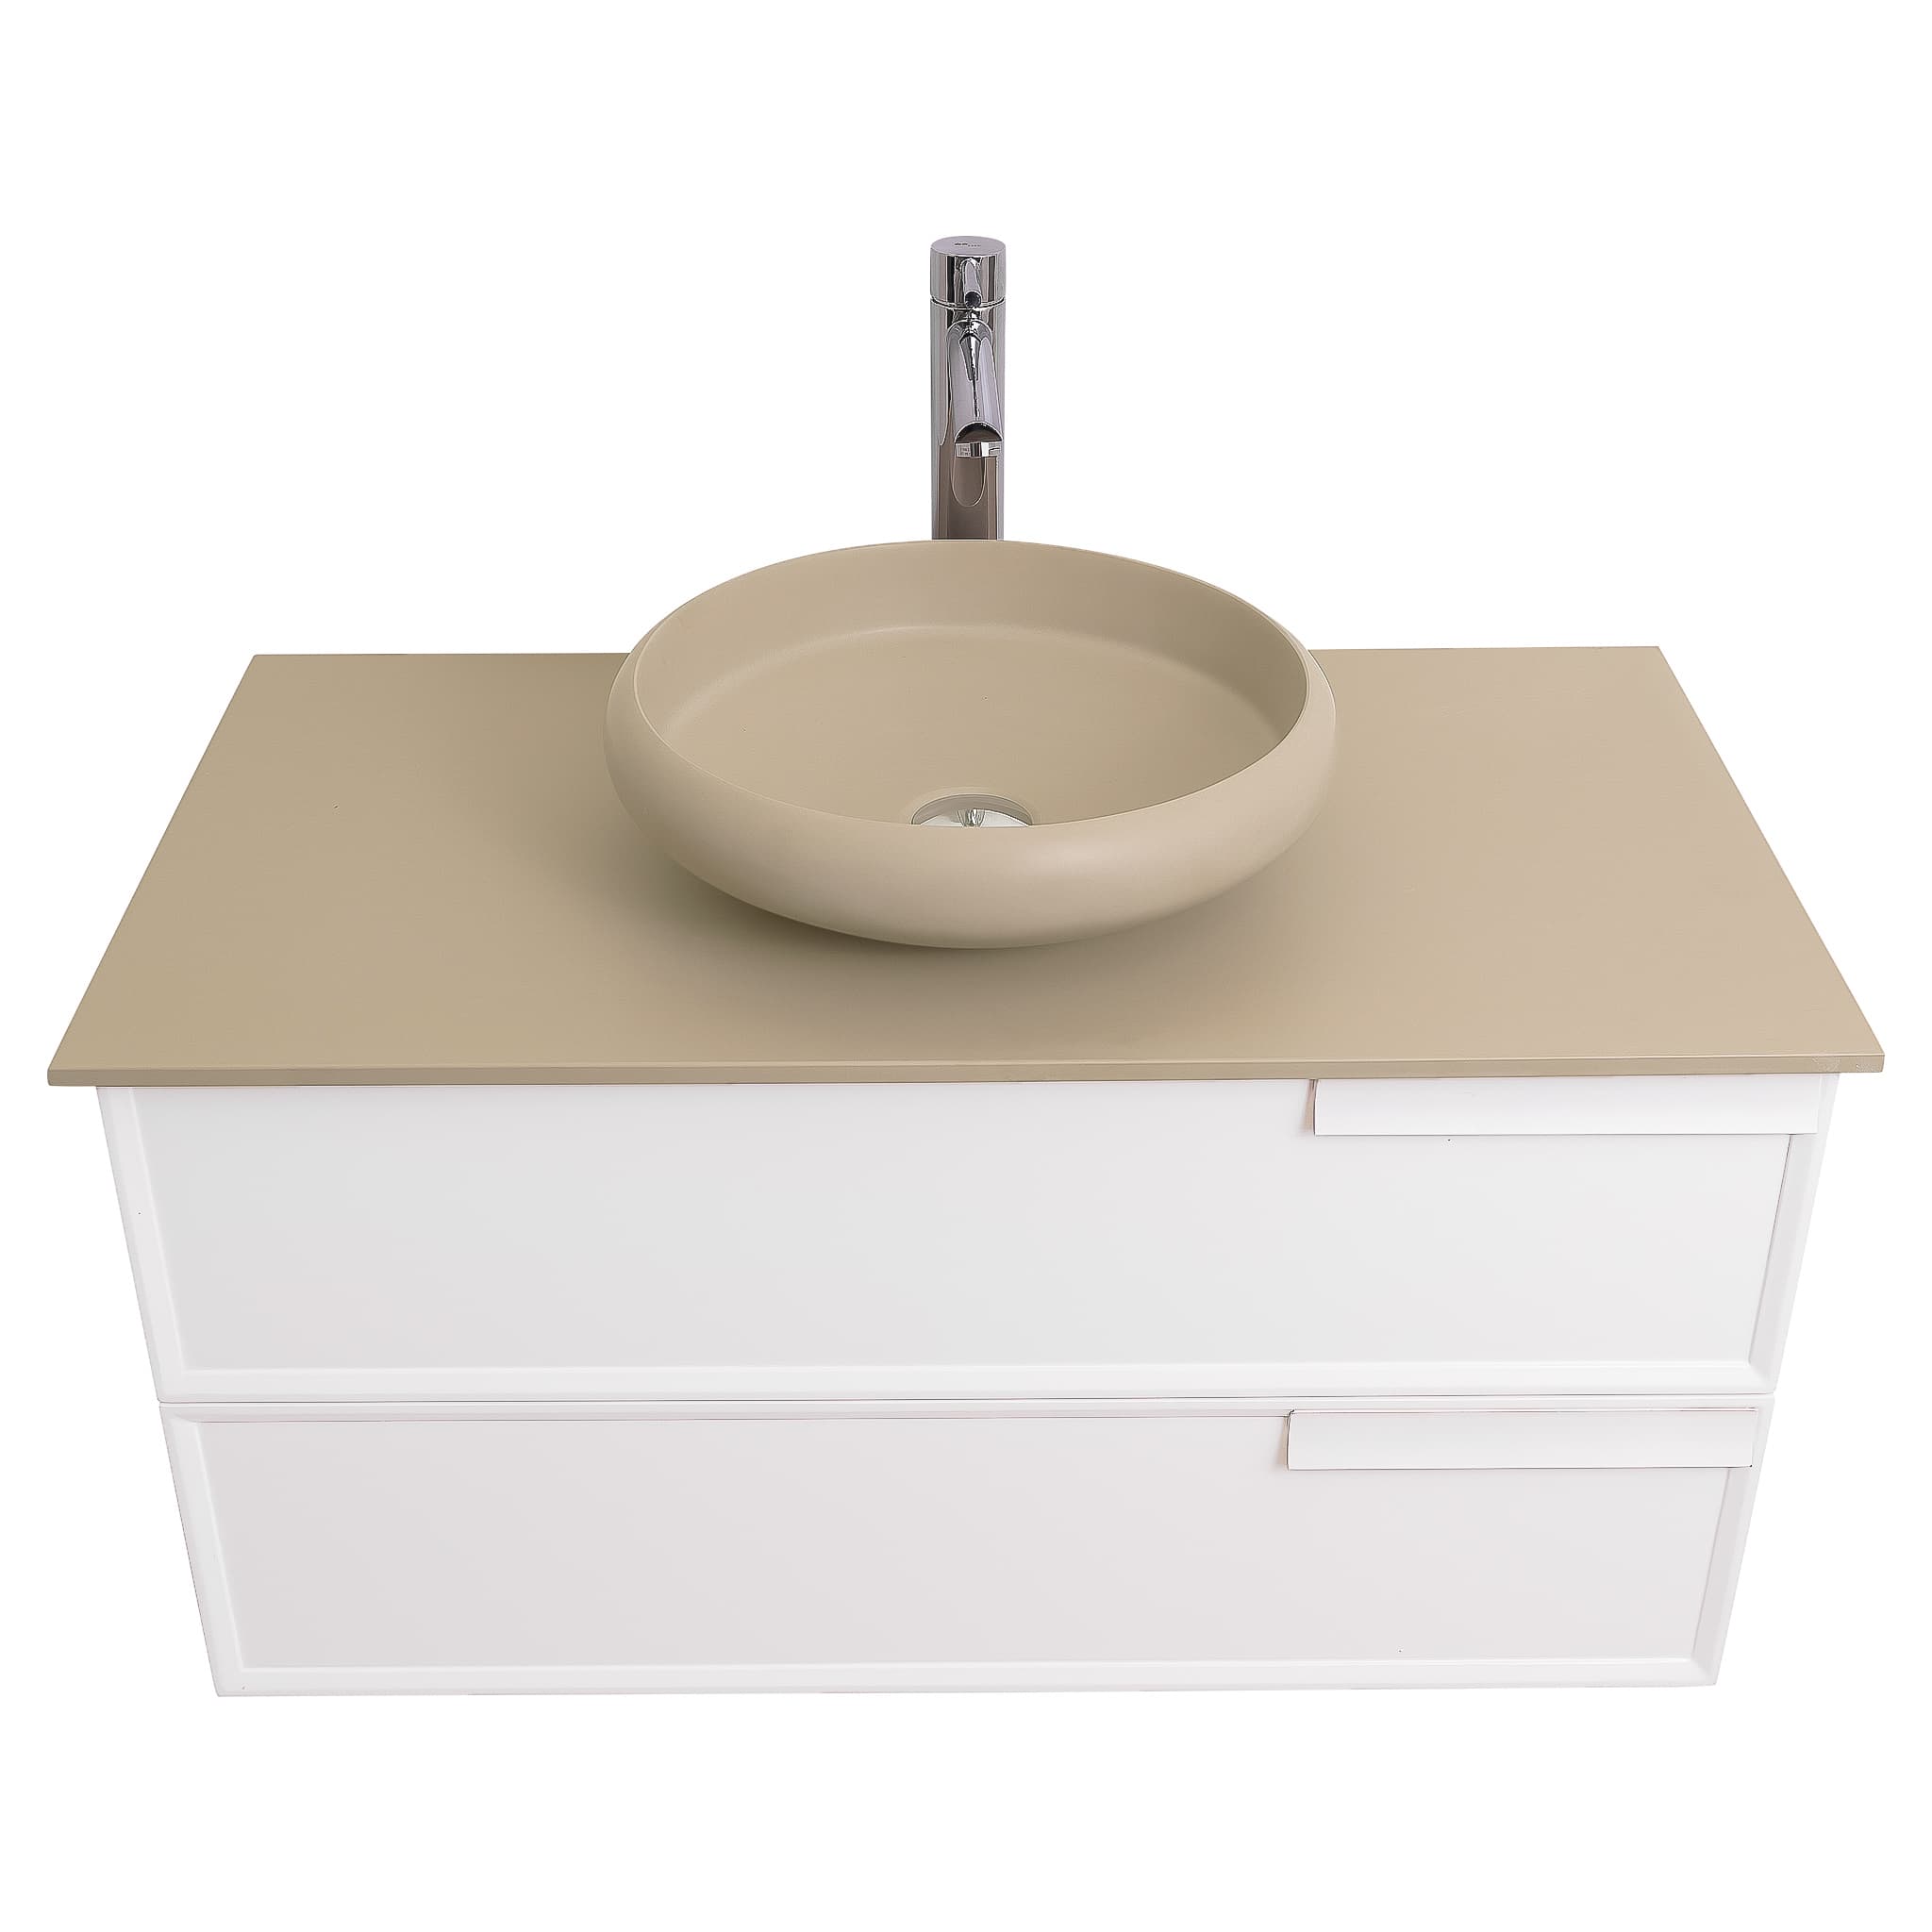 Garda 39.5 Matte White Cabinet, Solid Surface Flat Taupe Counter and Round Solid Surface Taupe Basin 1153, Wall Mounted Modern Vanity Set